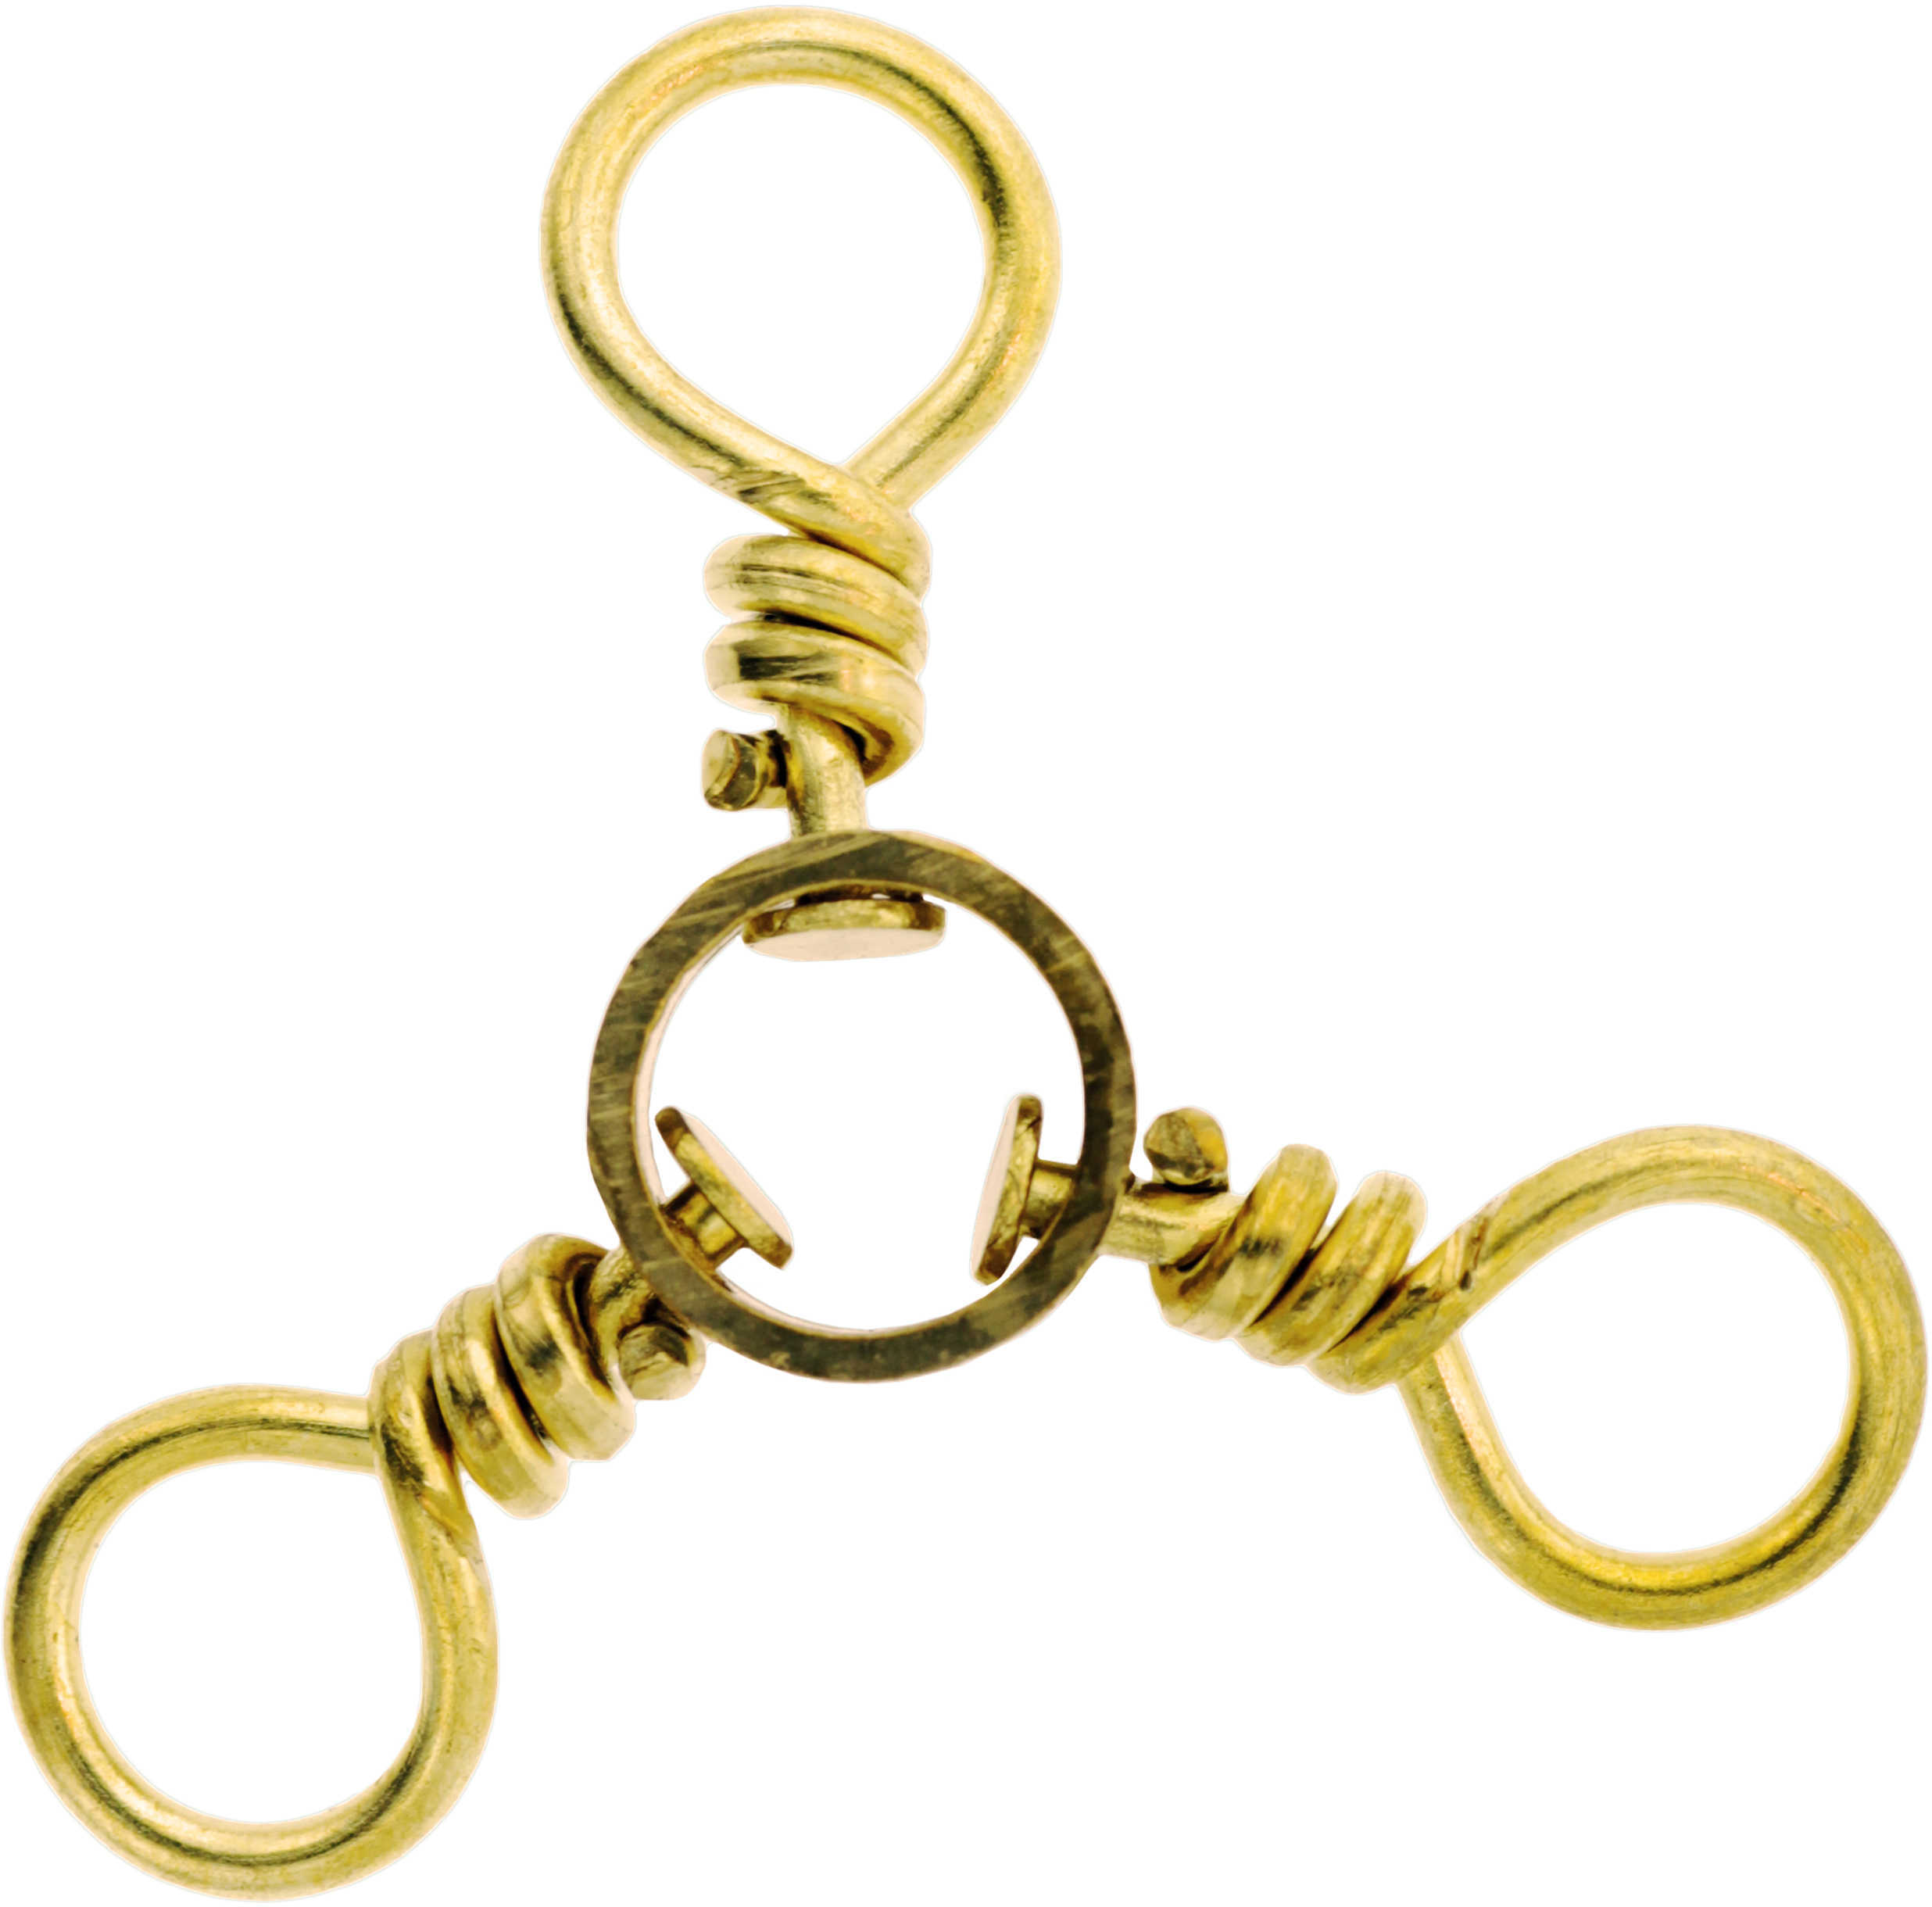 Eagle Claw Fishing Tackle 3-Way Swivel, Brass Size 1 (Per 12) Md: 01251-001